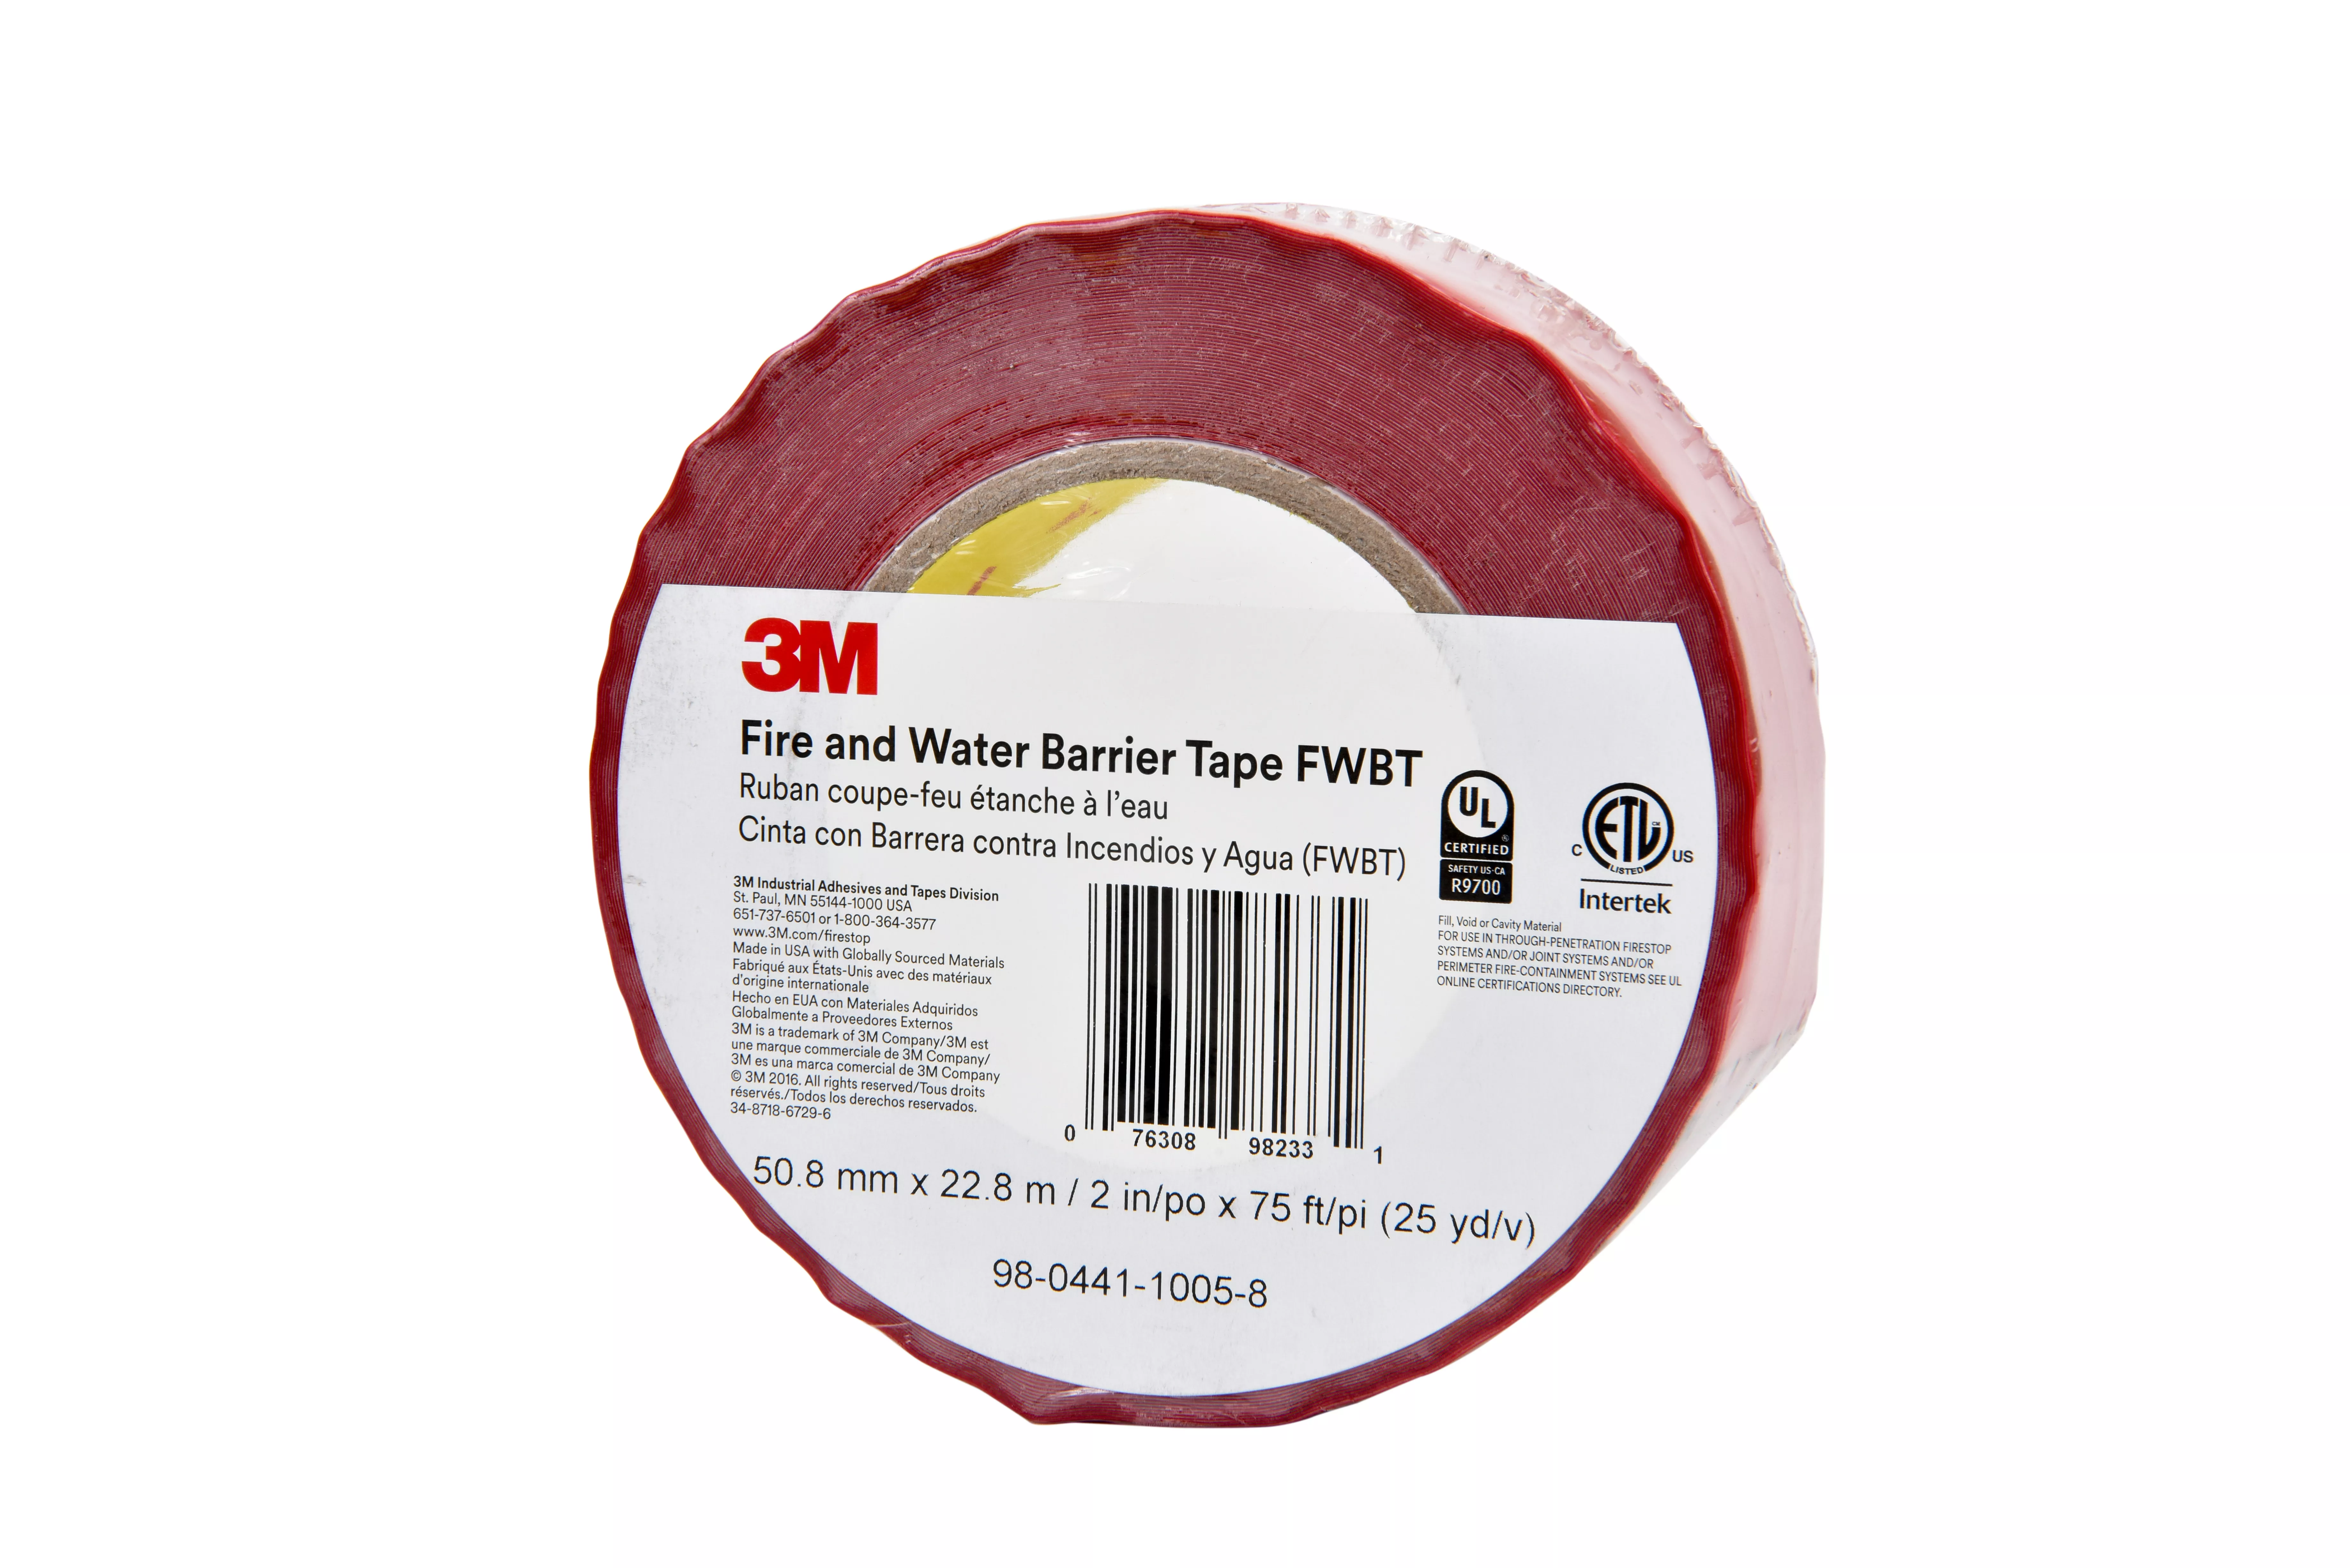 3M™ Fire and Water Barrier Tape FWBT2, Translucent, 2 in x 75 ft, 24
Each/Case